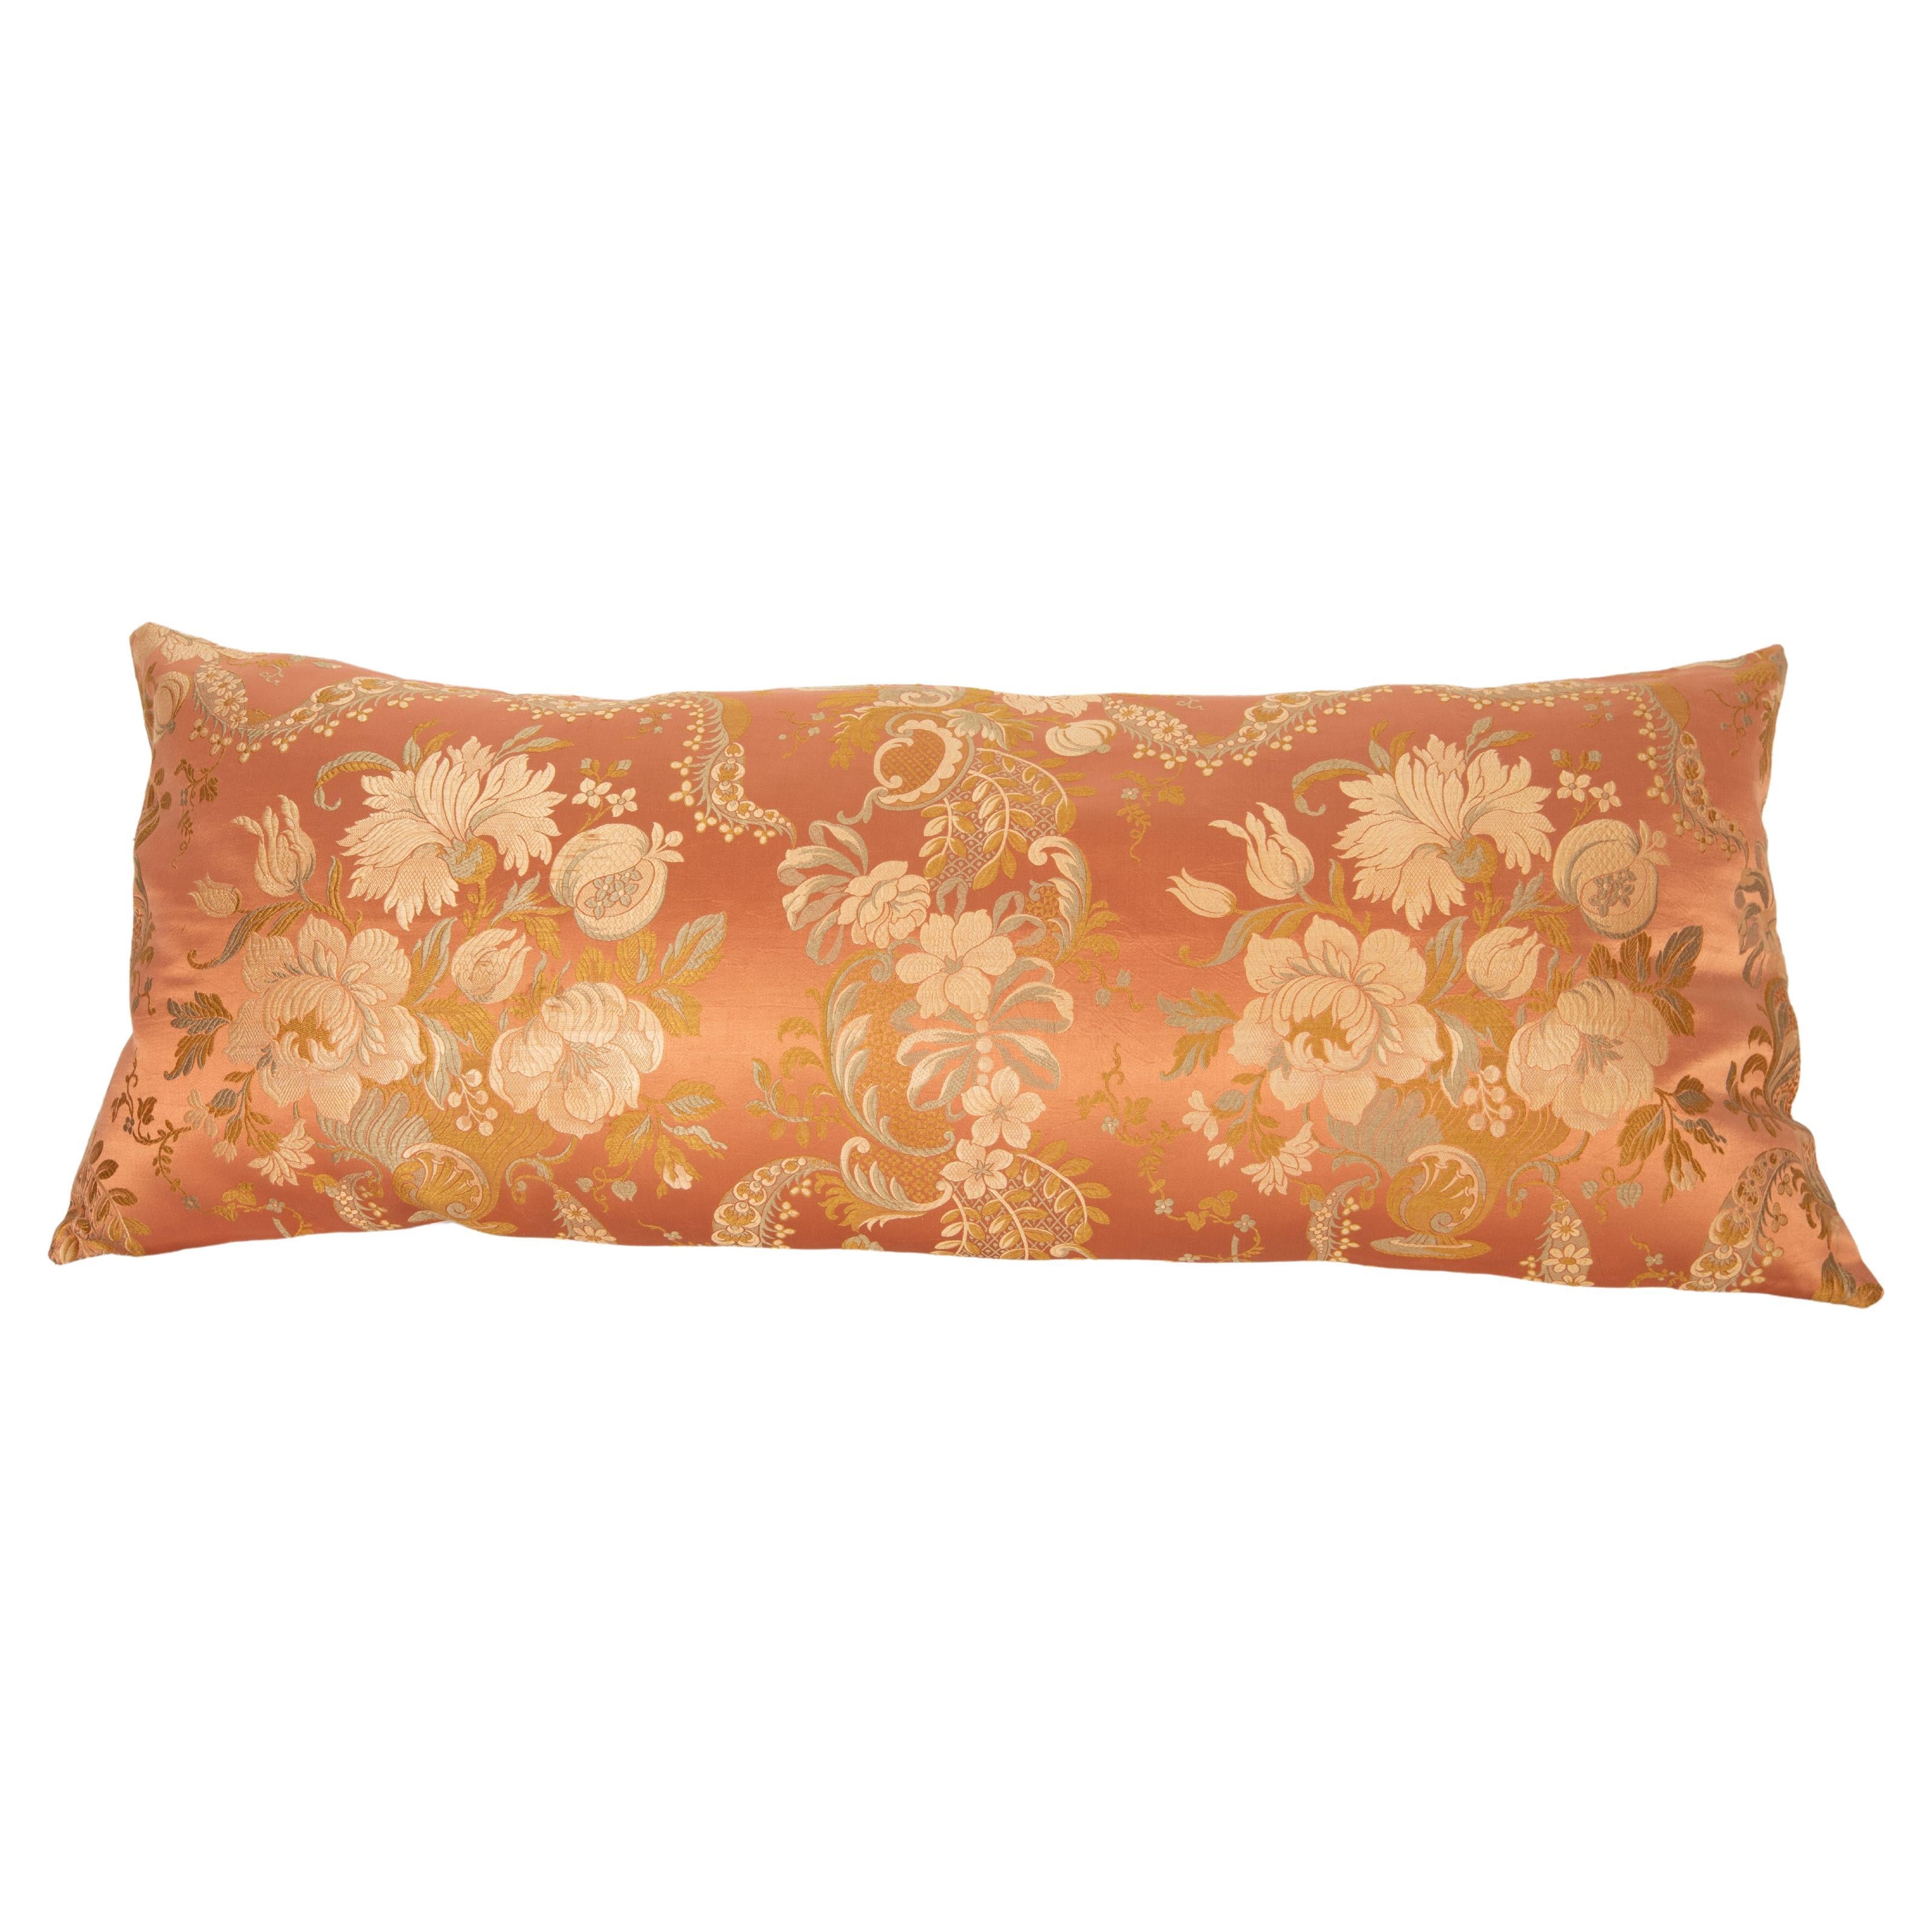 Antique Pillow Case Made from an Early 20th C. Silk Brocade